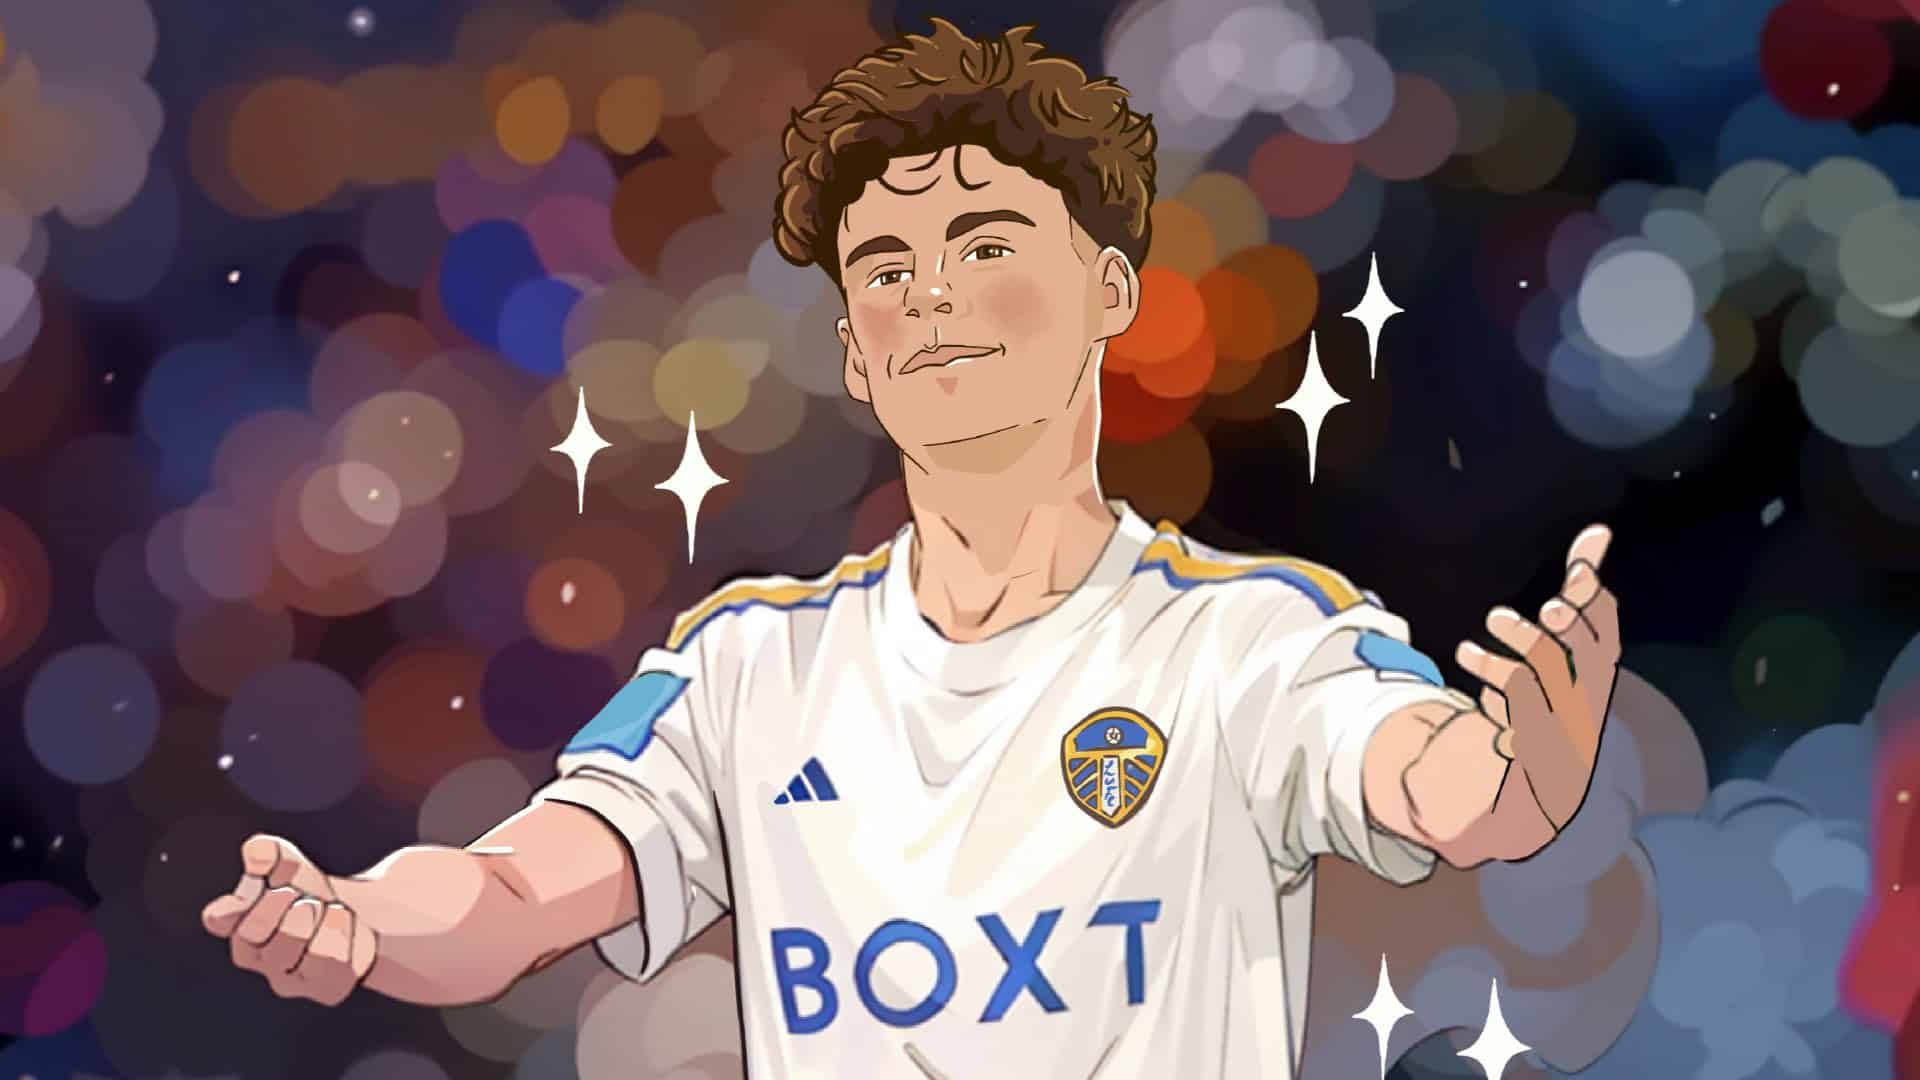 An illustration of a sparkly Archie Gray looking cool in the home kit